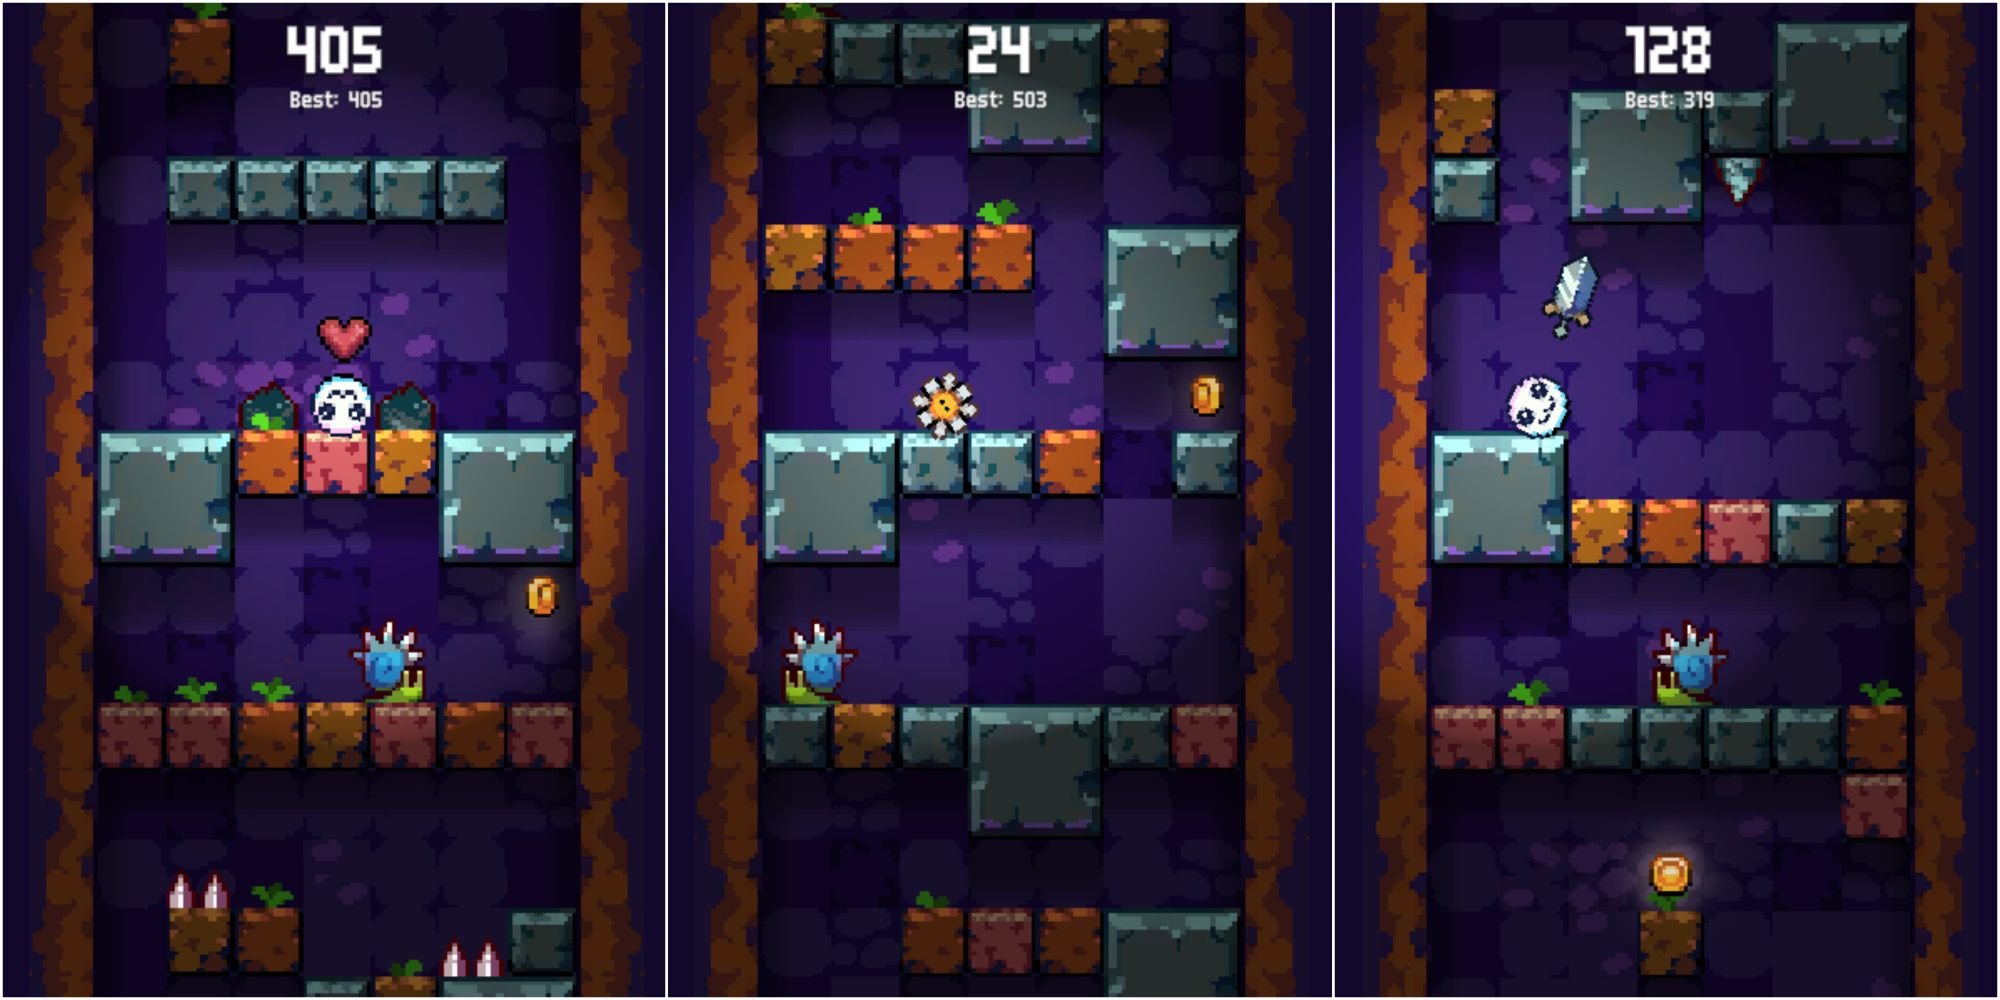 Down Hole, Downwards Platformer With Smiley Ball Or Flower Character, Snail Enemies